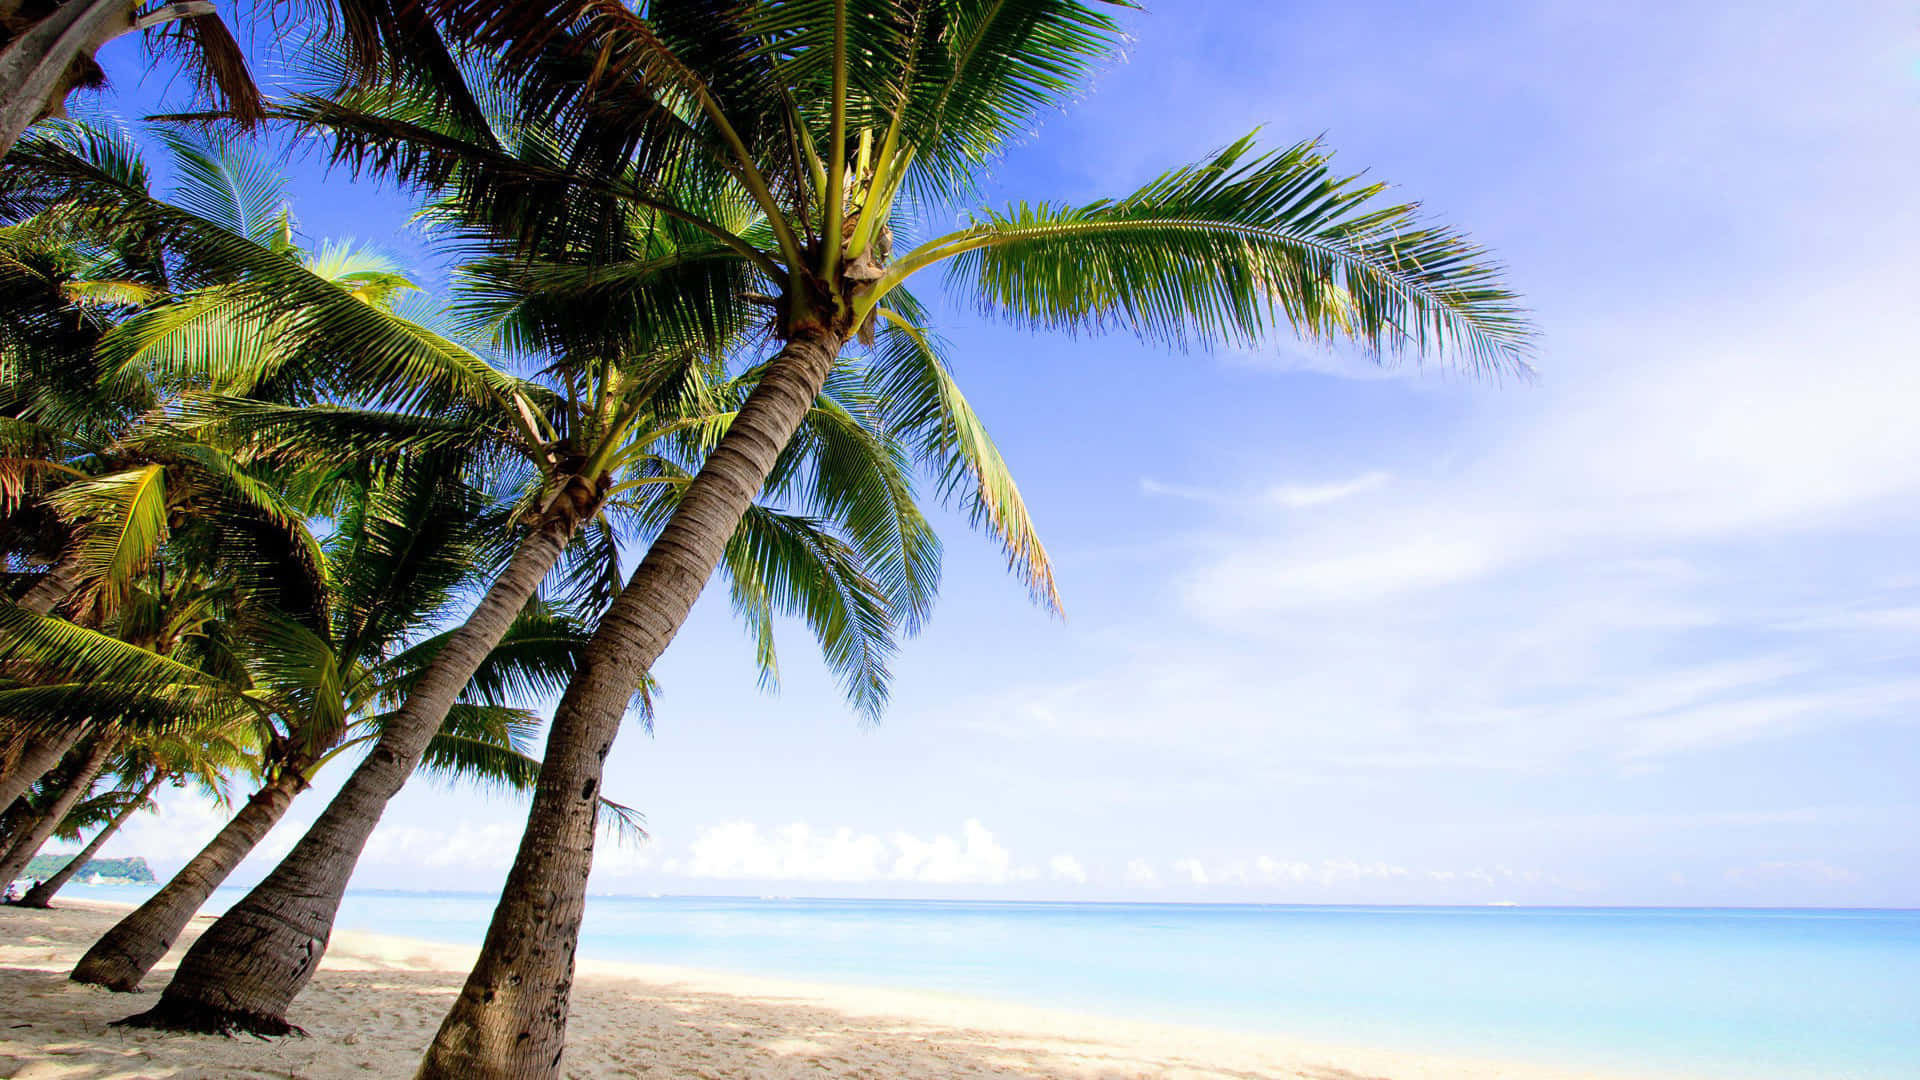 A view of a wondrous paradise, with a tall palm tree in the backdrop